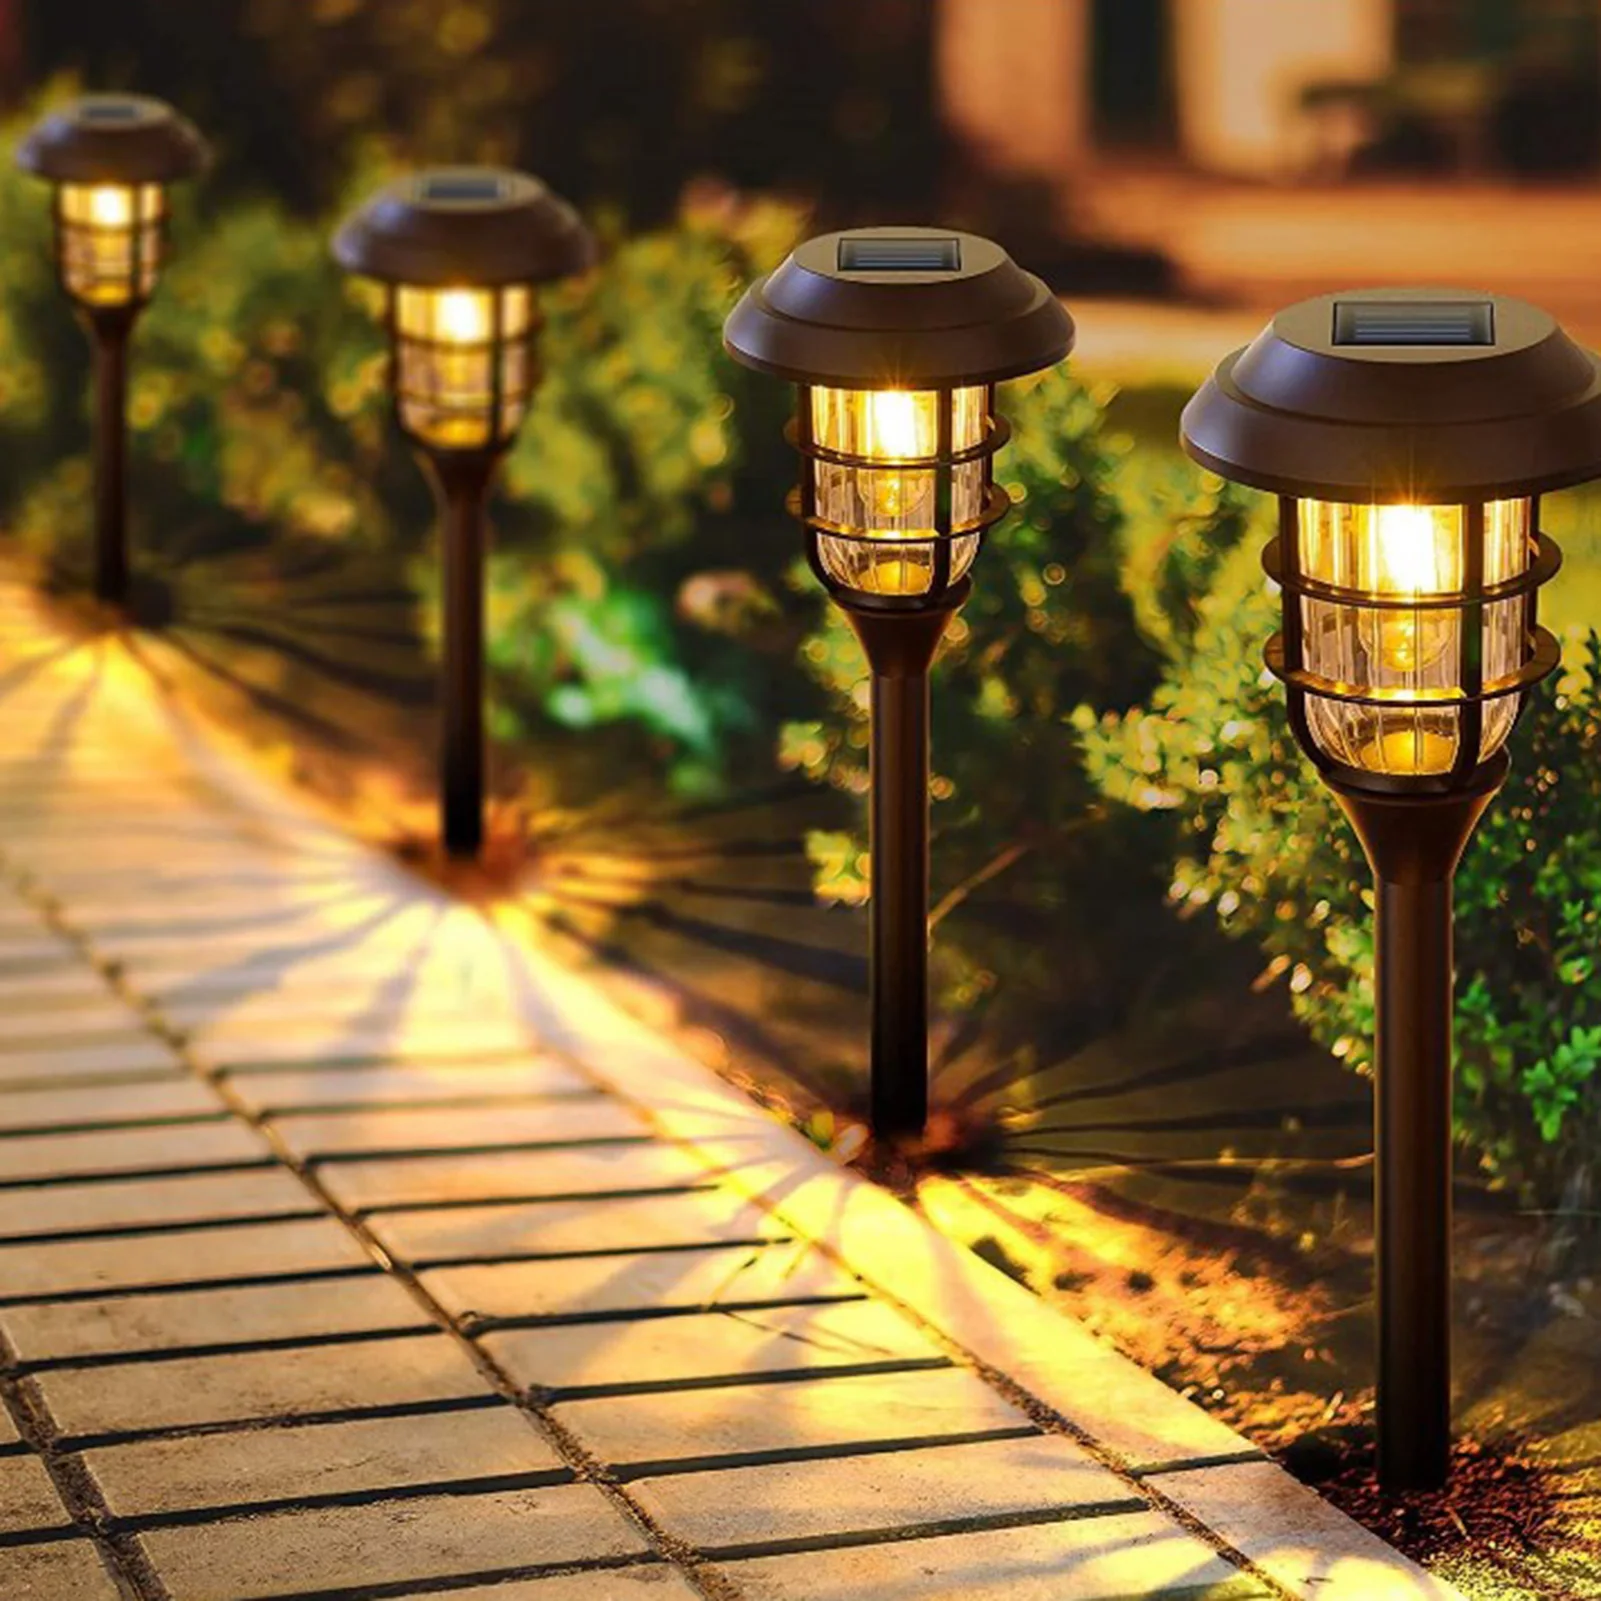 2Pcs Solar Outdoor Lights Color Changing Solar Garden Lights Waterproof Auto On/Off Solar Landscape Lamp for Yard Patio Pathway